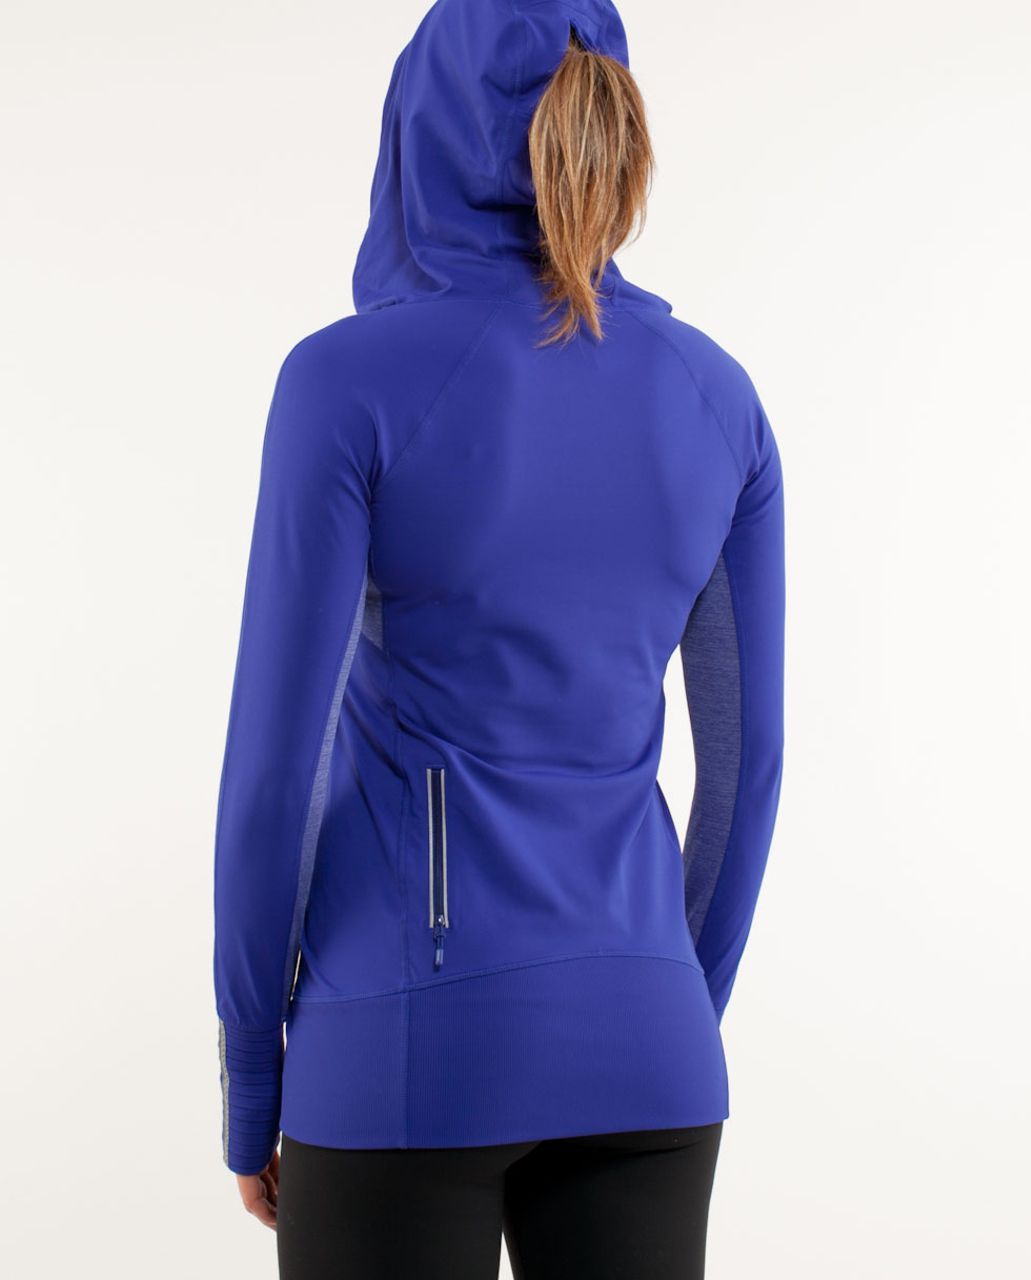 Lululemon Run:  Stay On Course Pullover - Pigment Blue